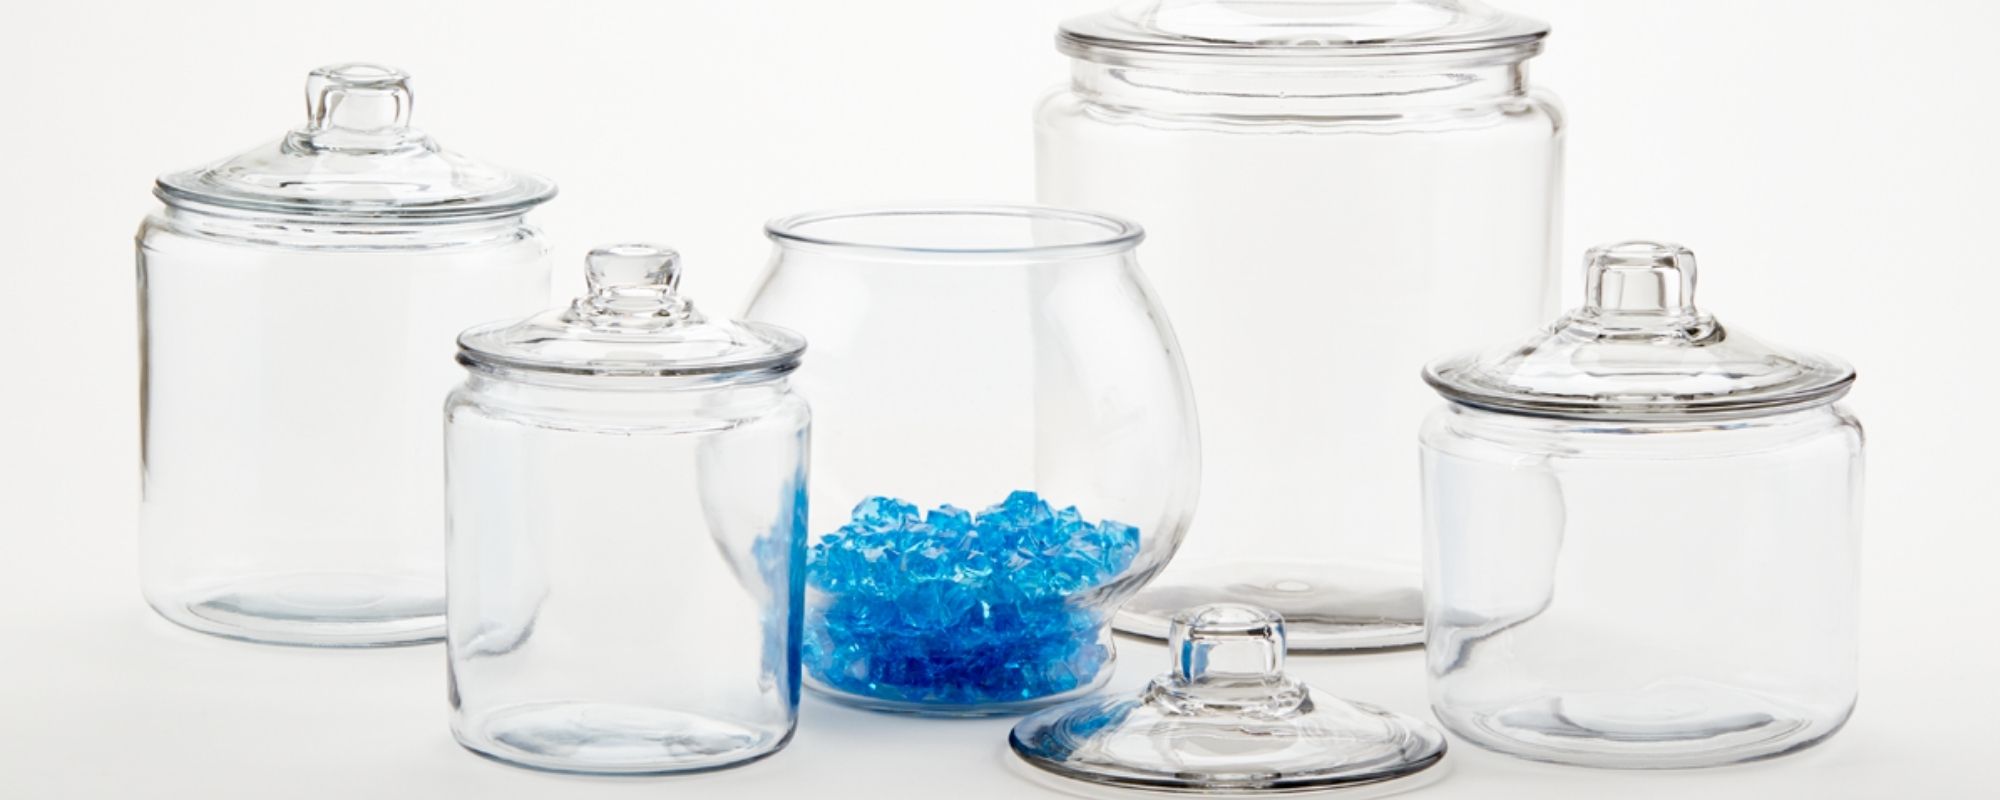 photo of glass jars and lids